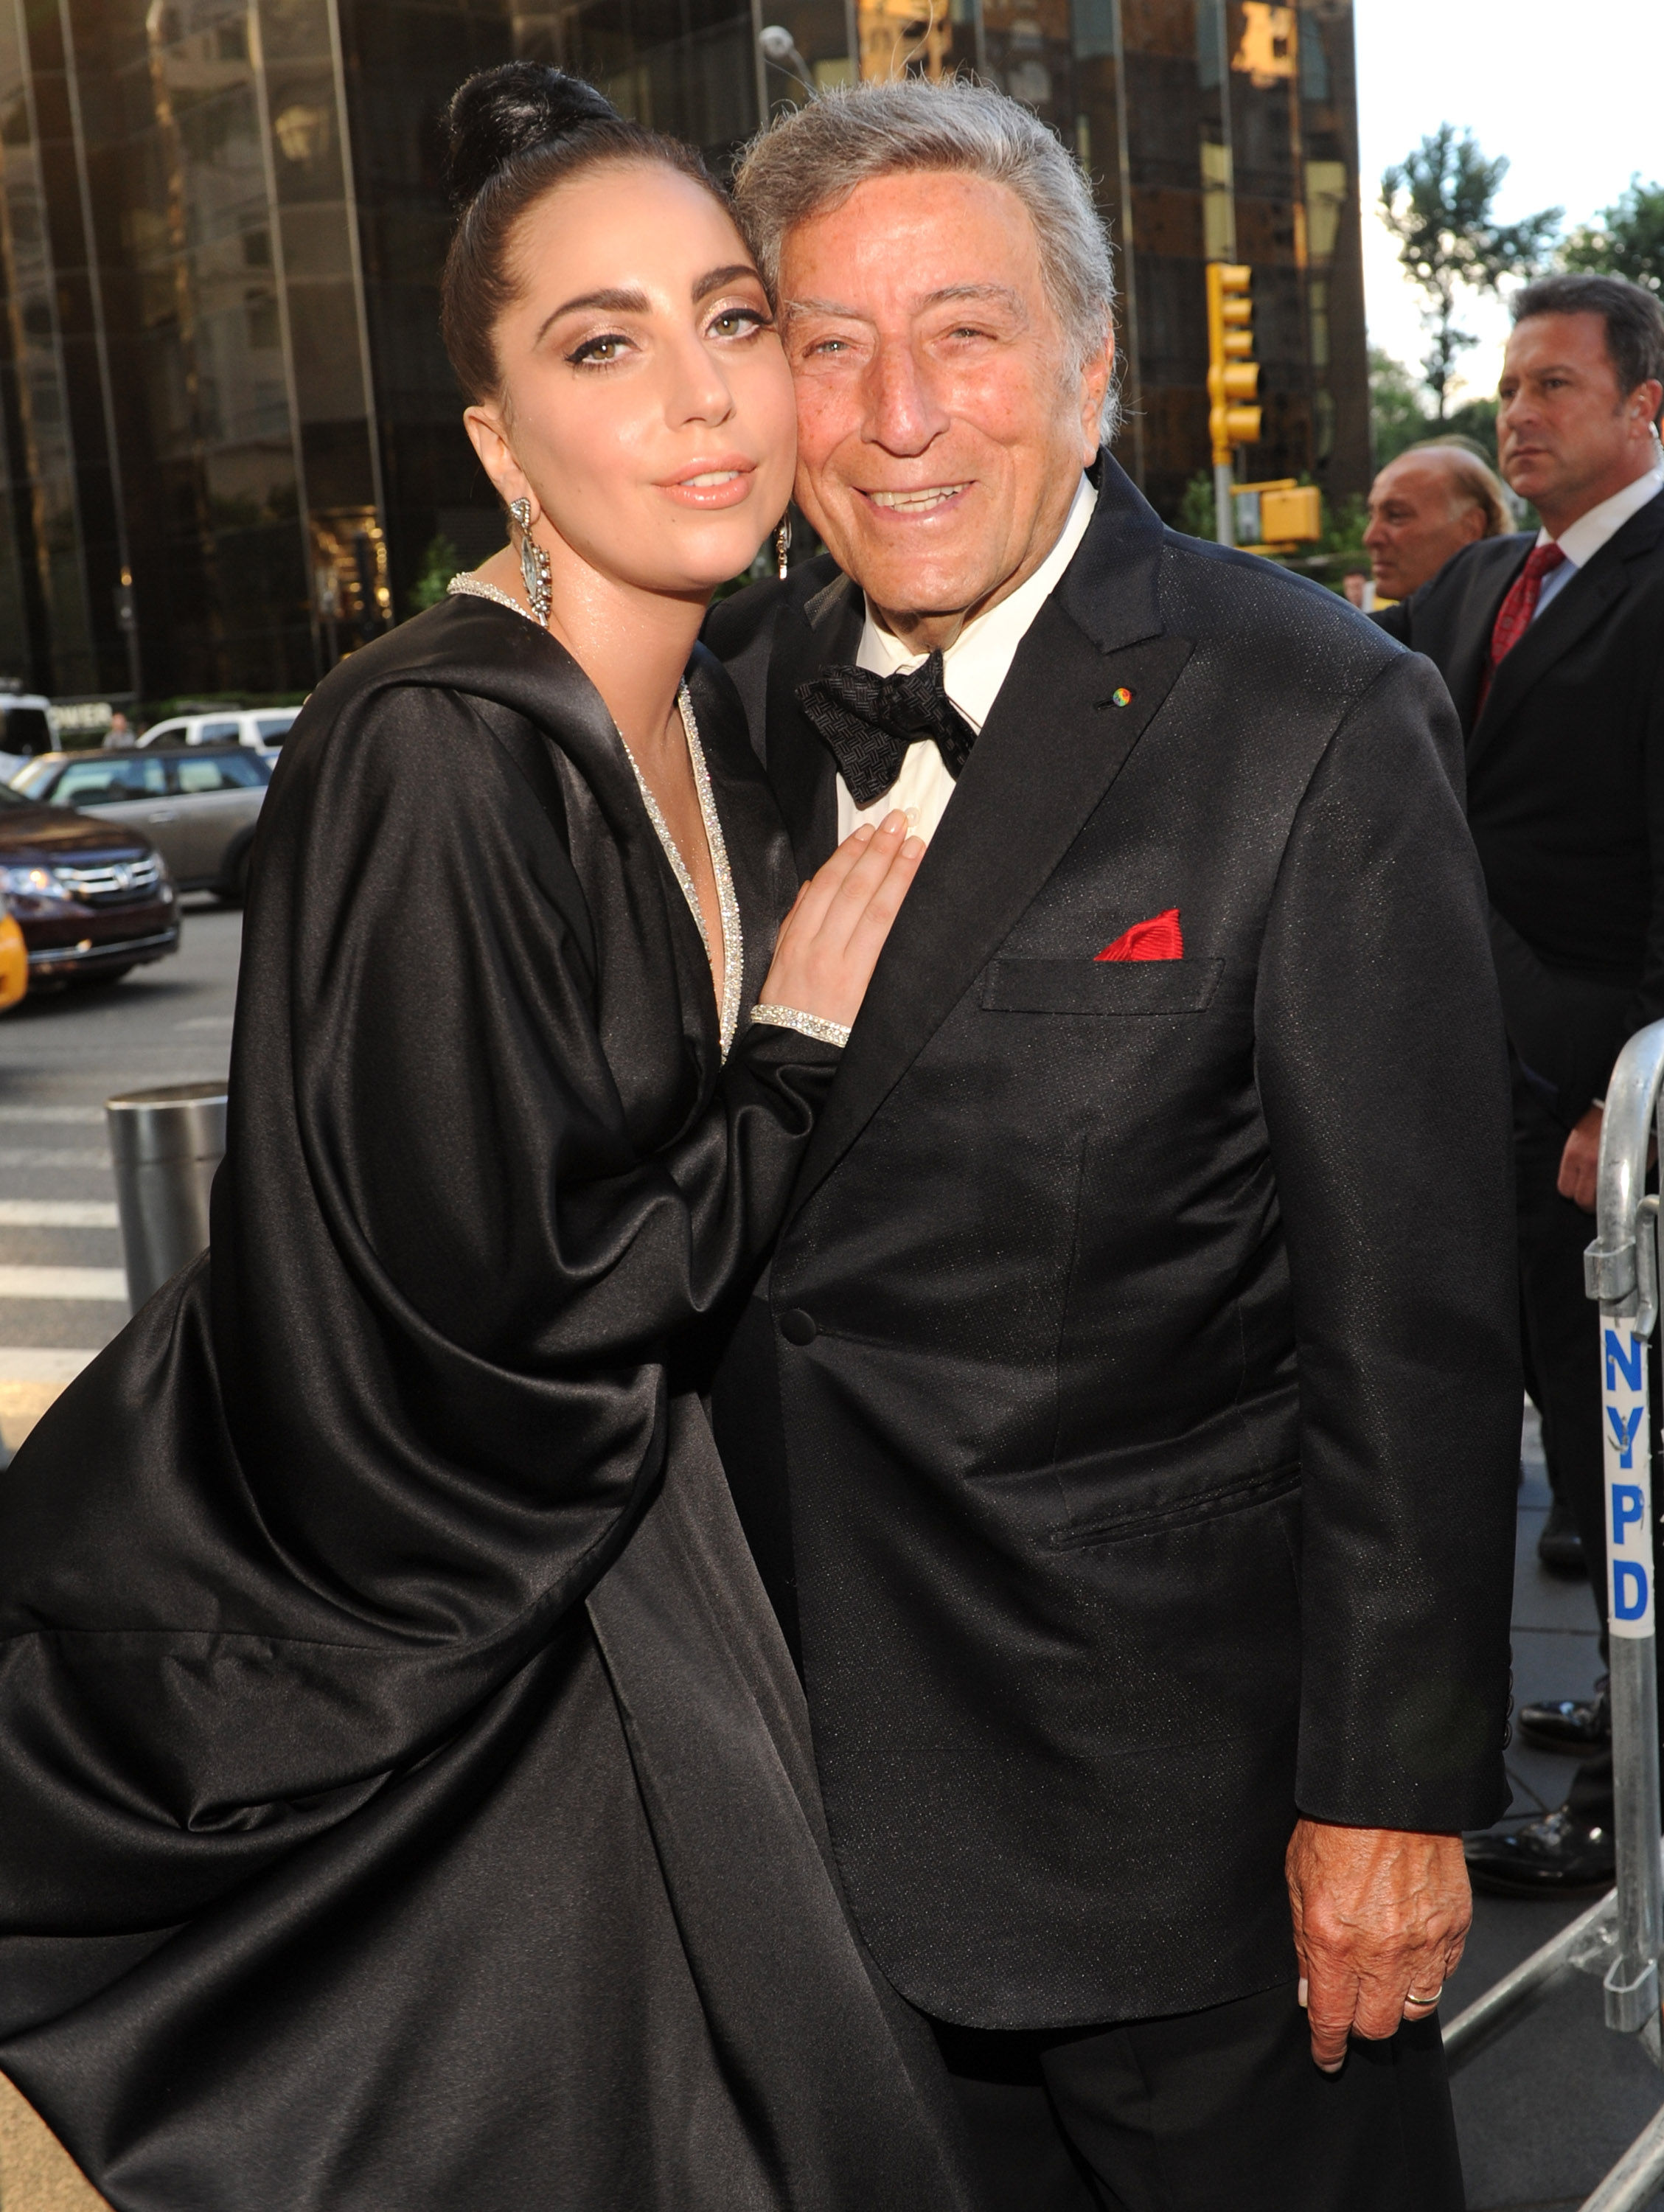 Tony Bennett and Lady Gaga arrive to their "Cheek To Cheek" taping at Jazz at Lincoln Center on July 28, 2014 in New York City. (Kevin Mazur—Getty Images)